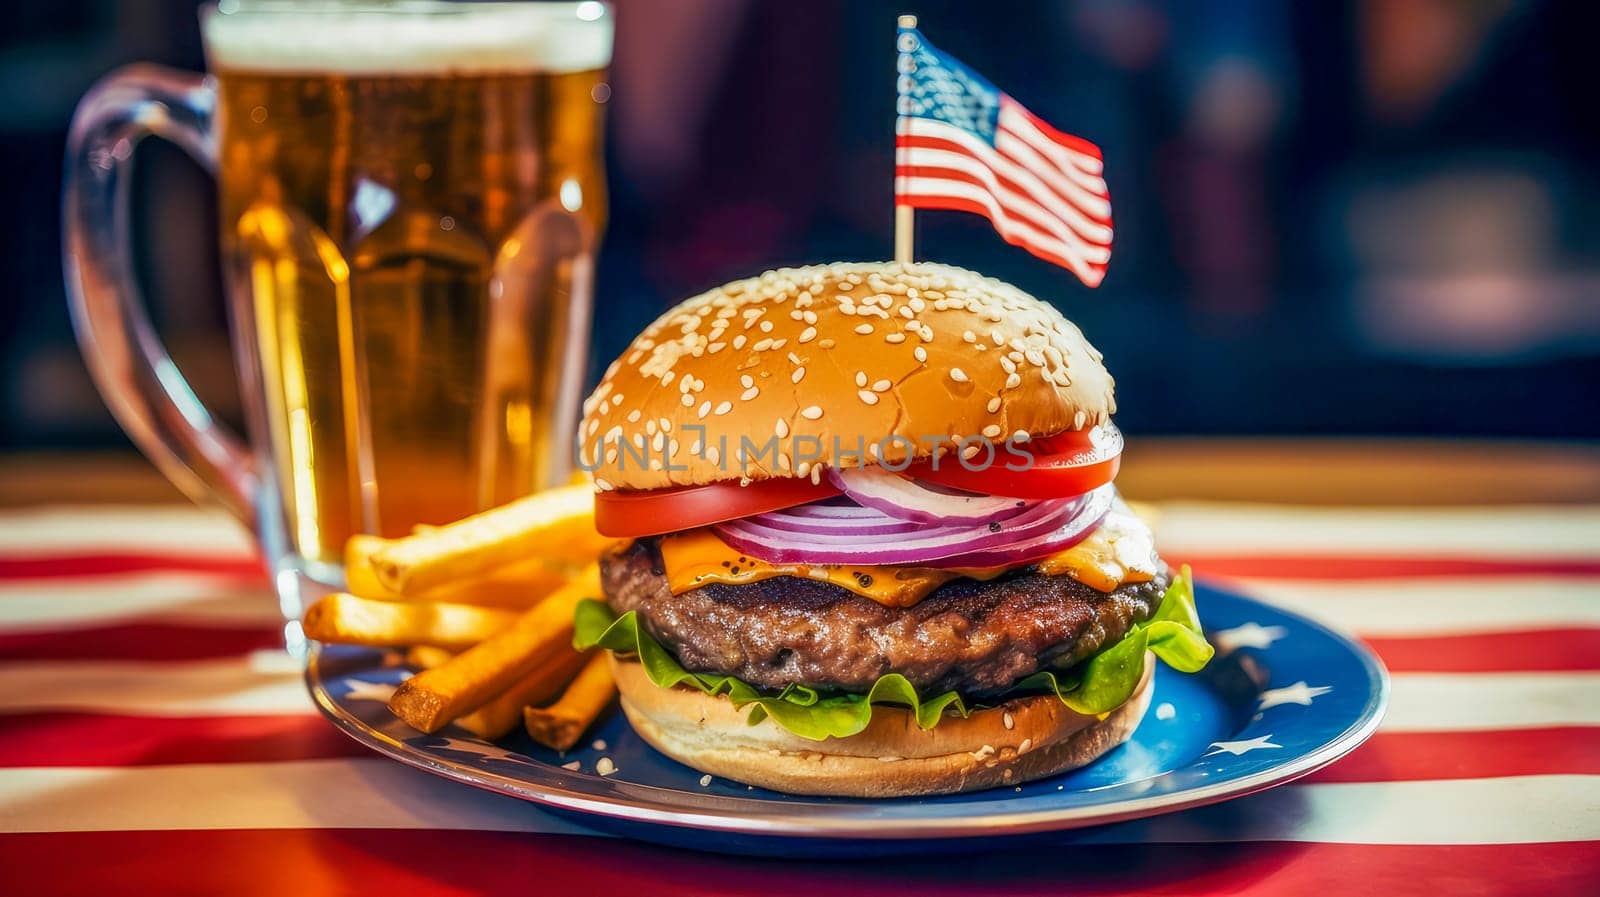 A large, delicious burger on a plate, fries and a drink in a patriotic cafe, against the backdrop of the American flag. by Alla_Yurtayeva